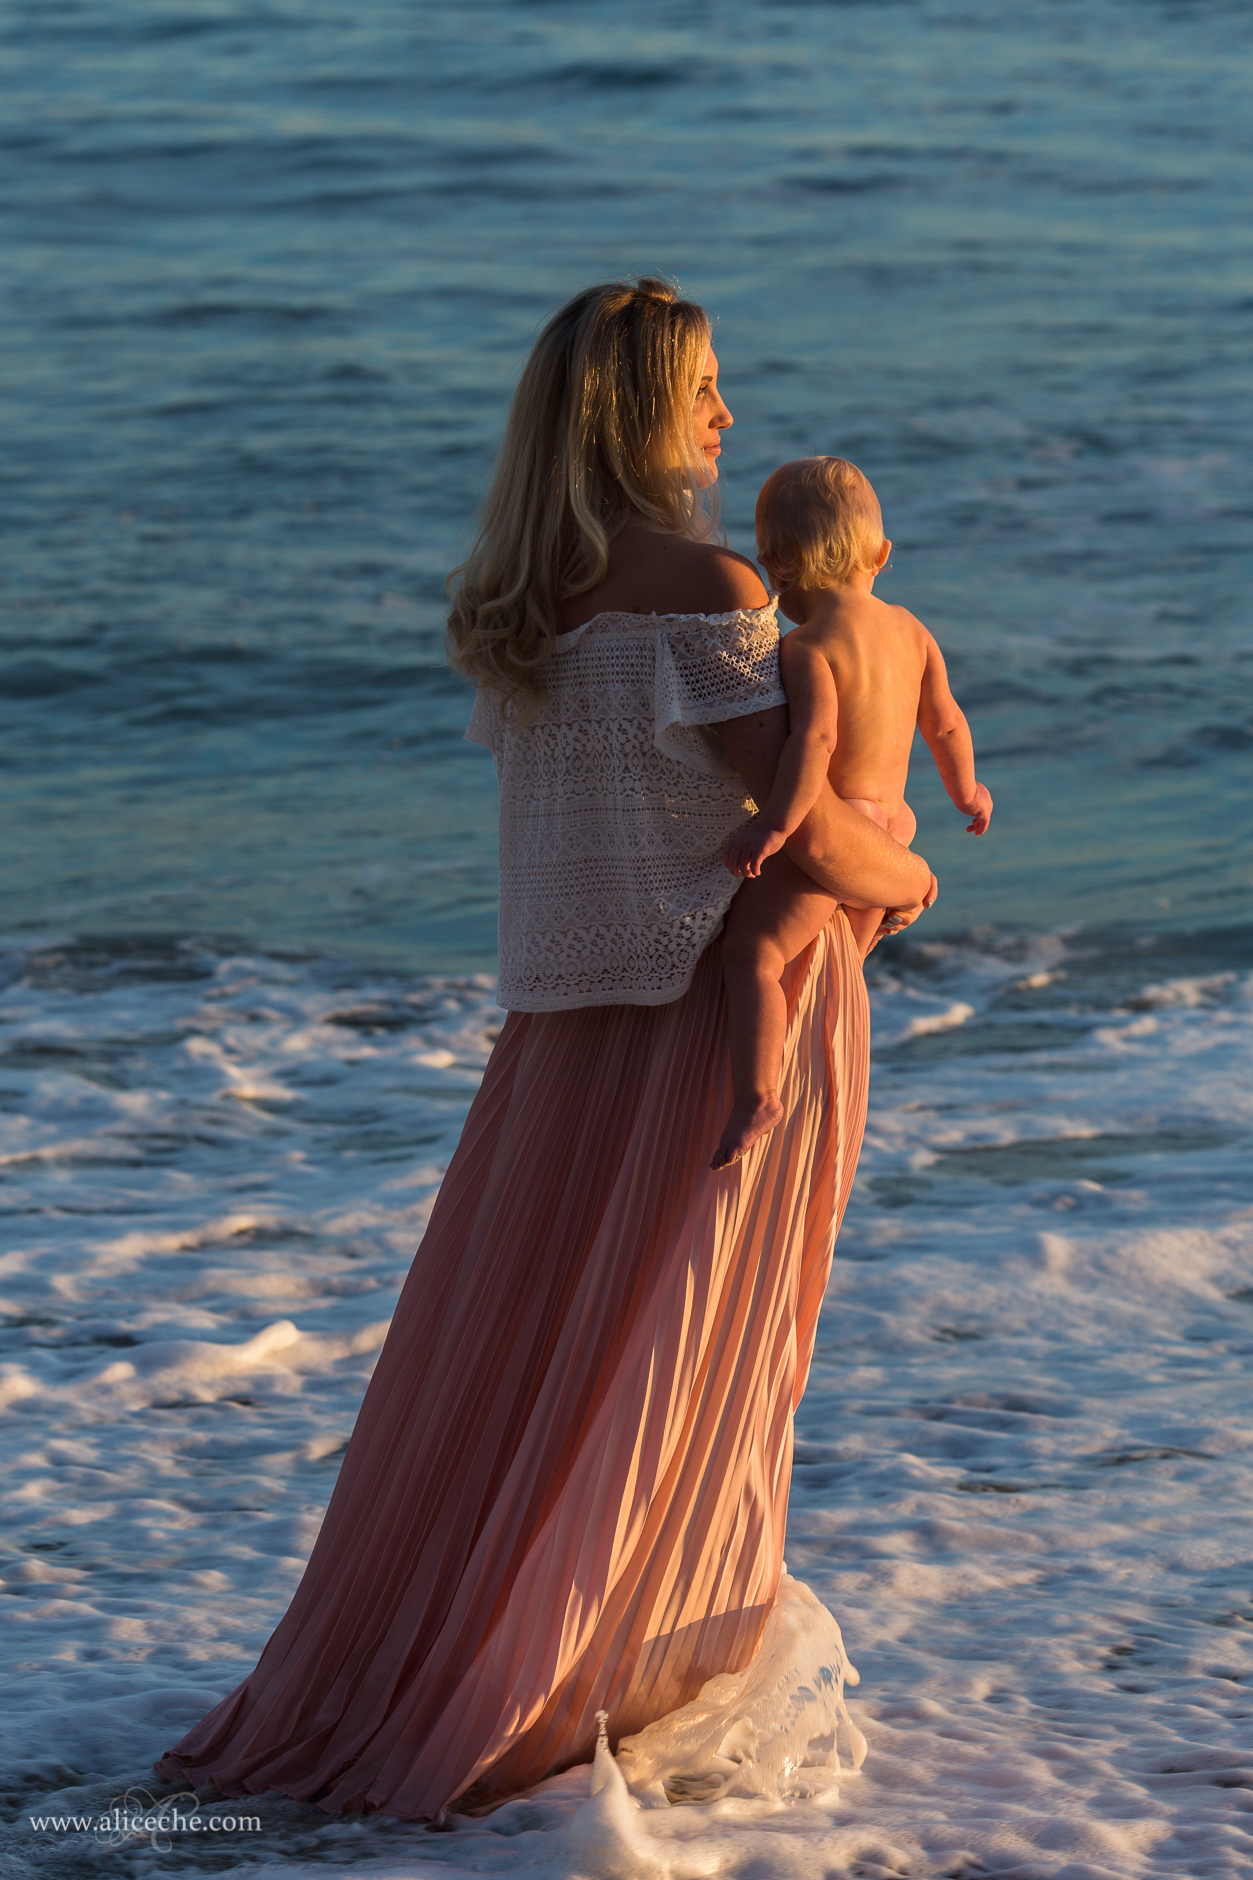 alice-che-photography-blair-thurston-retreat-malibu-family-session-mom-holding-baby-in-ocean